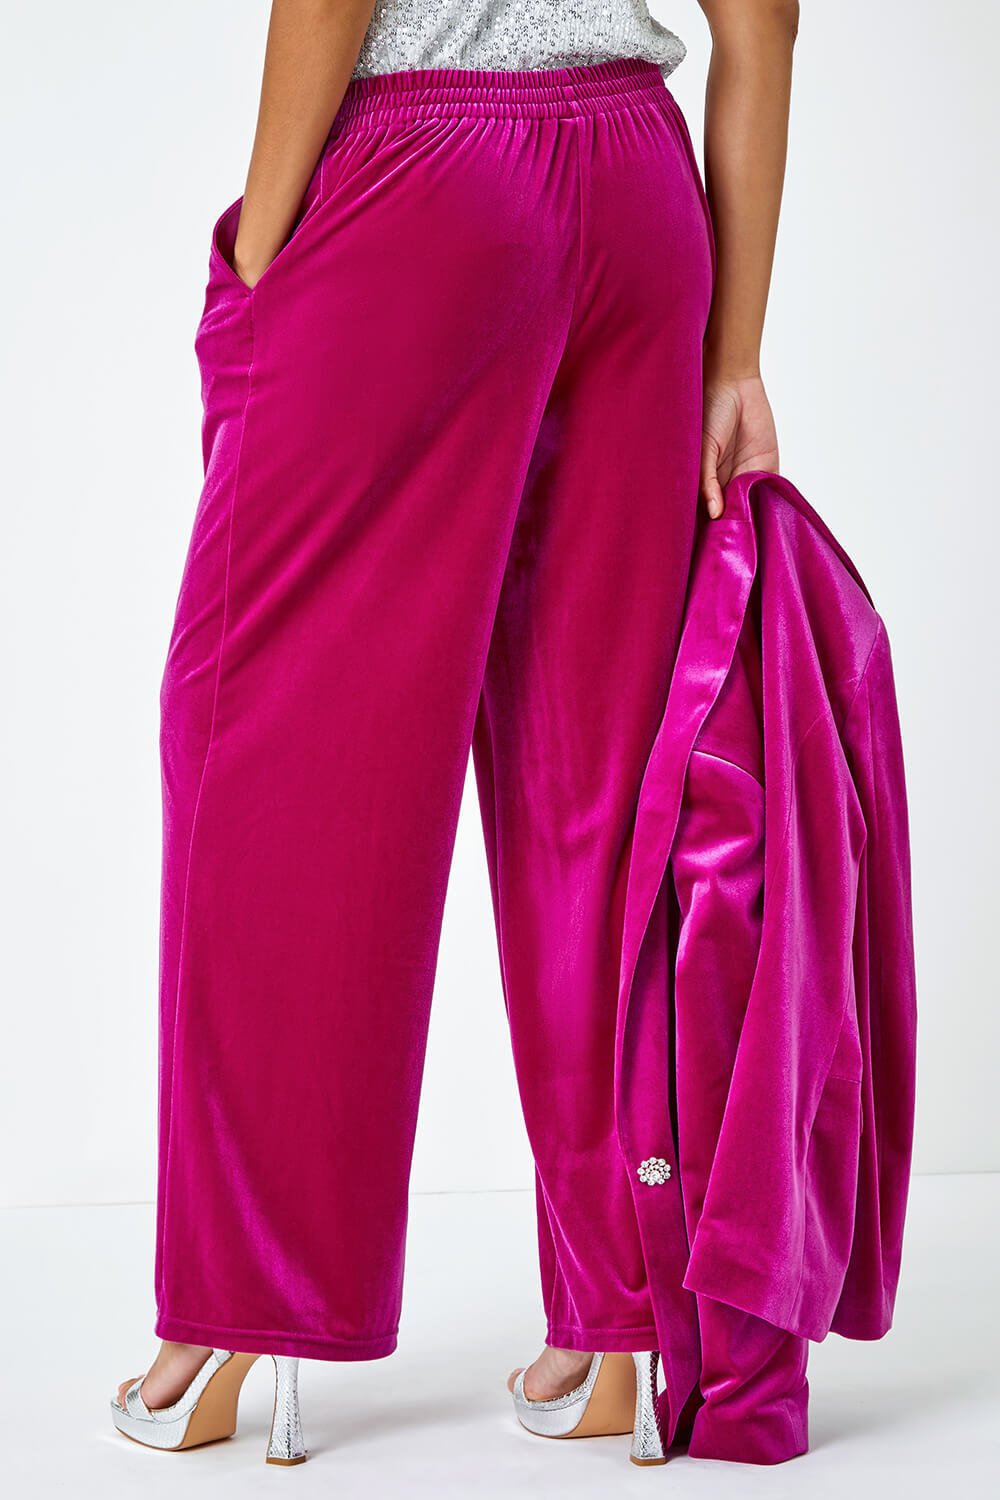 PINK Wide Leg Velvet Stretch Trousers, Image 3 of 6